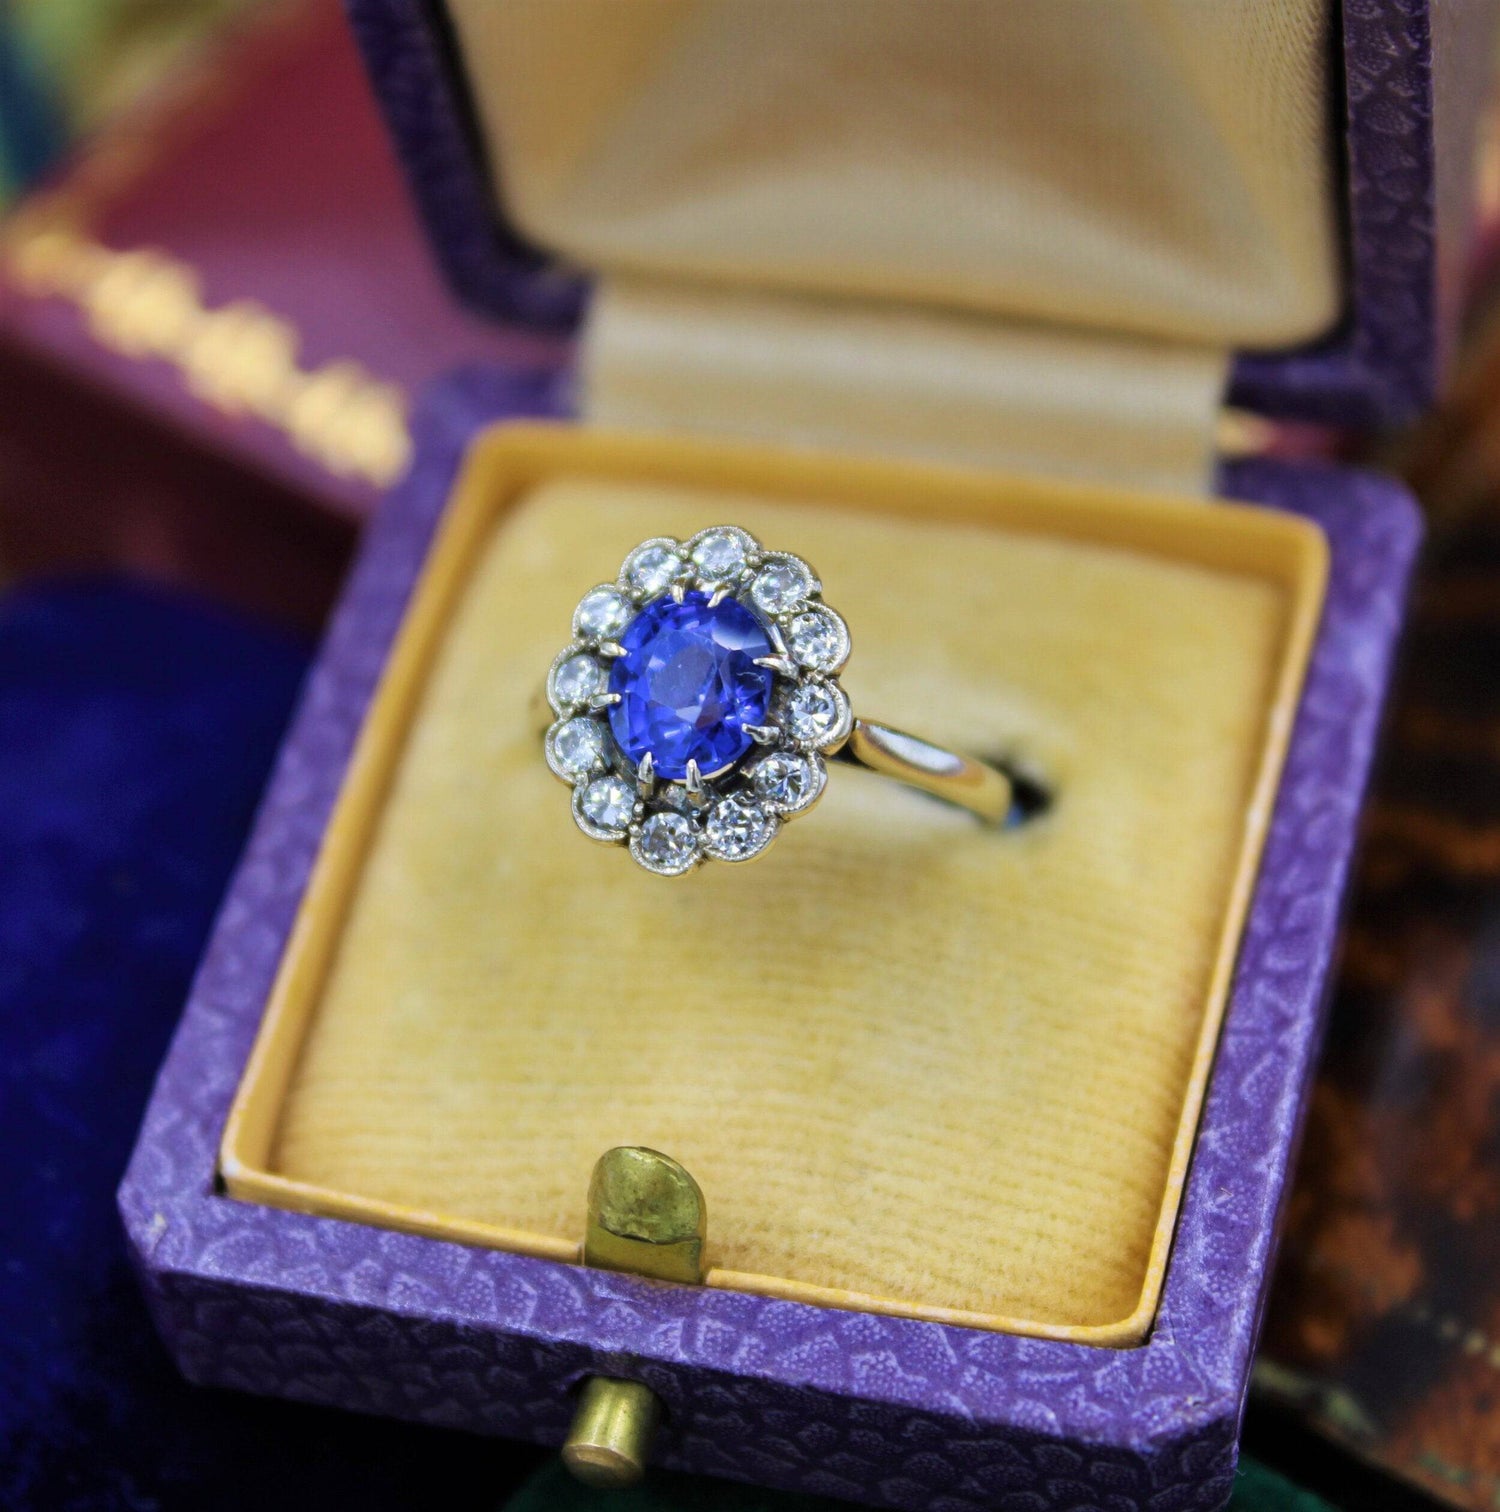 A very fine Sapphire & Diamond Cluster Ring mounted in 14ct White Gold, Continental, Circa 1930 - Robin Haydock Antiques